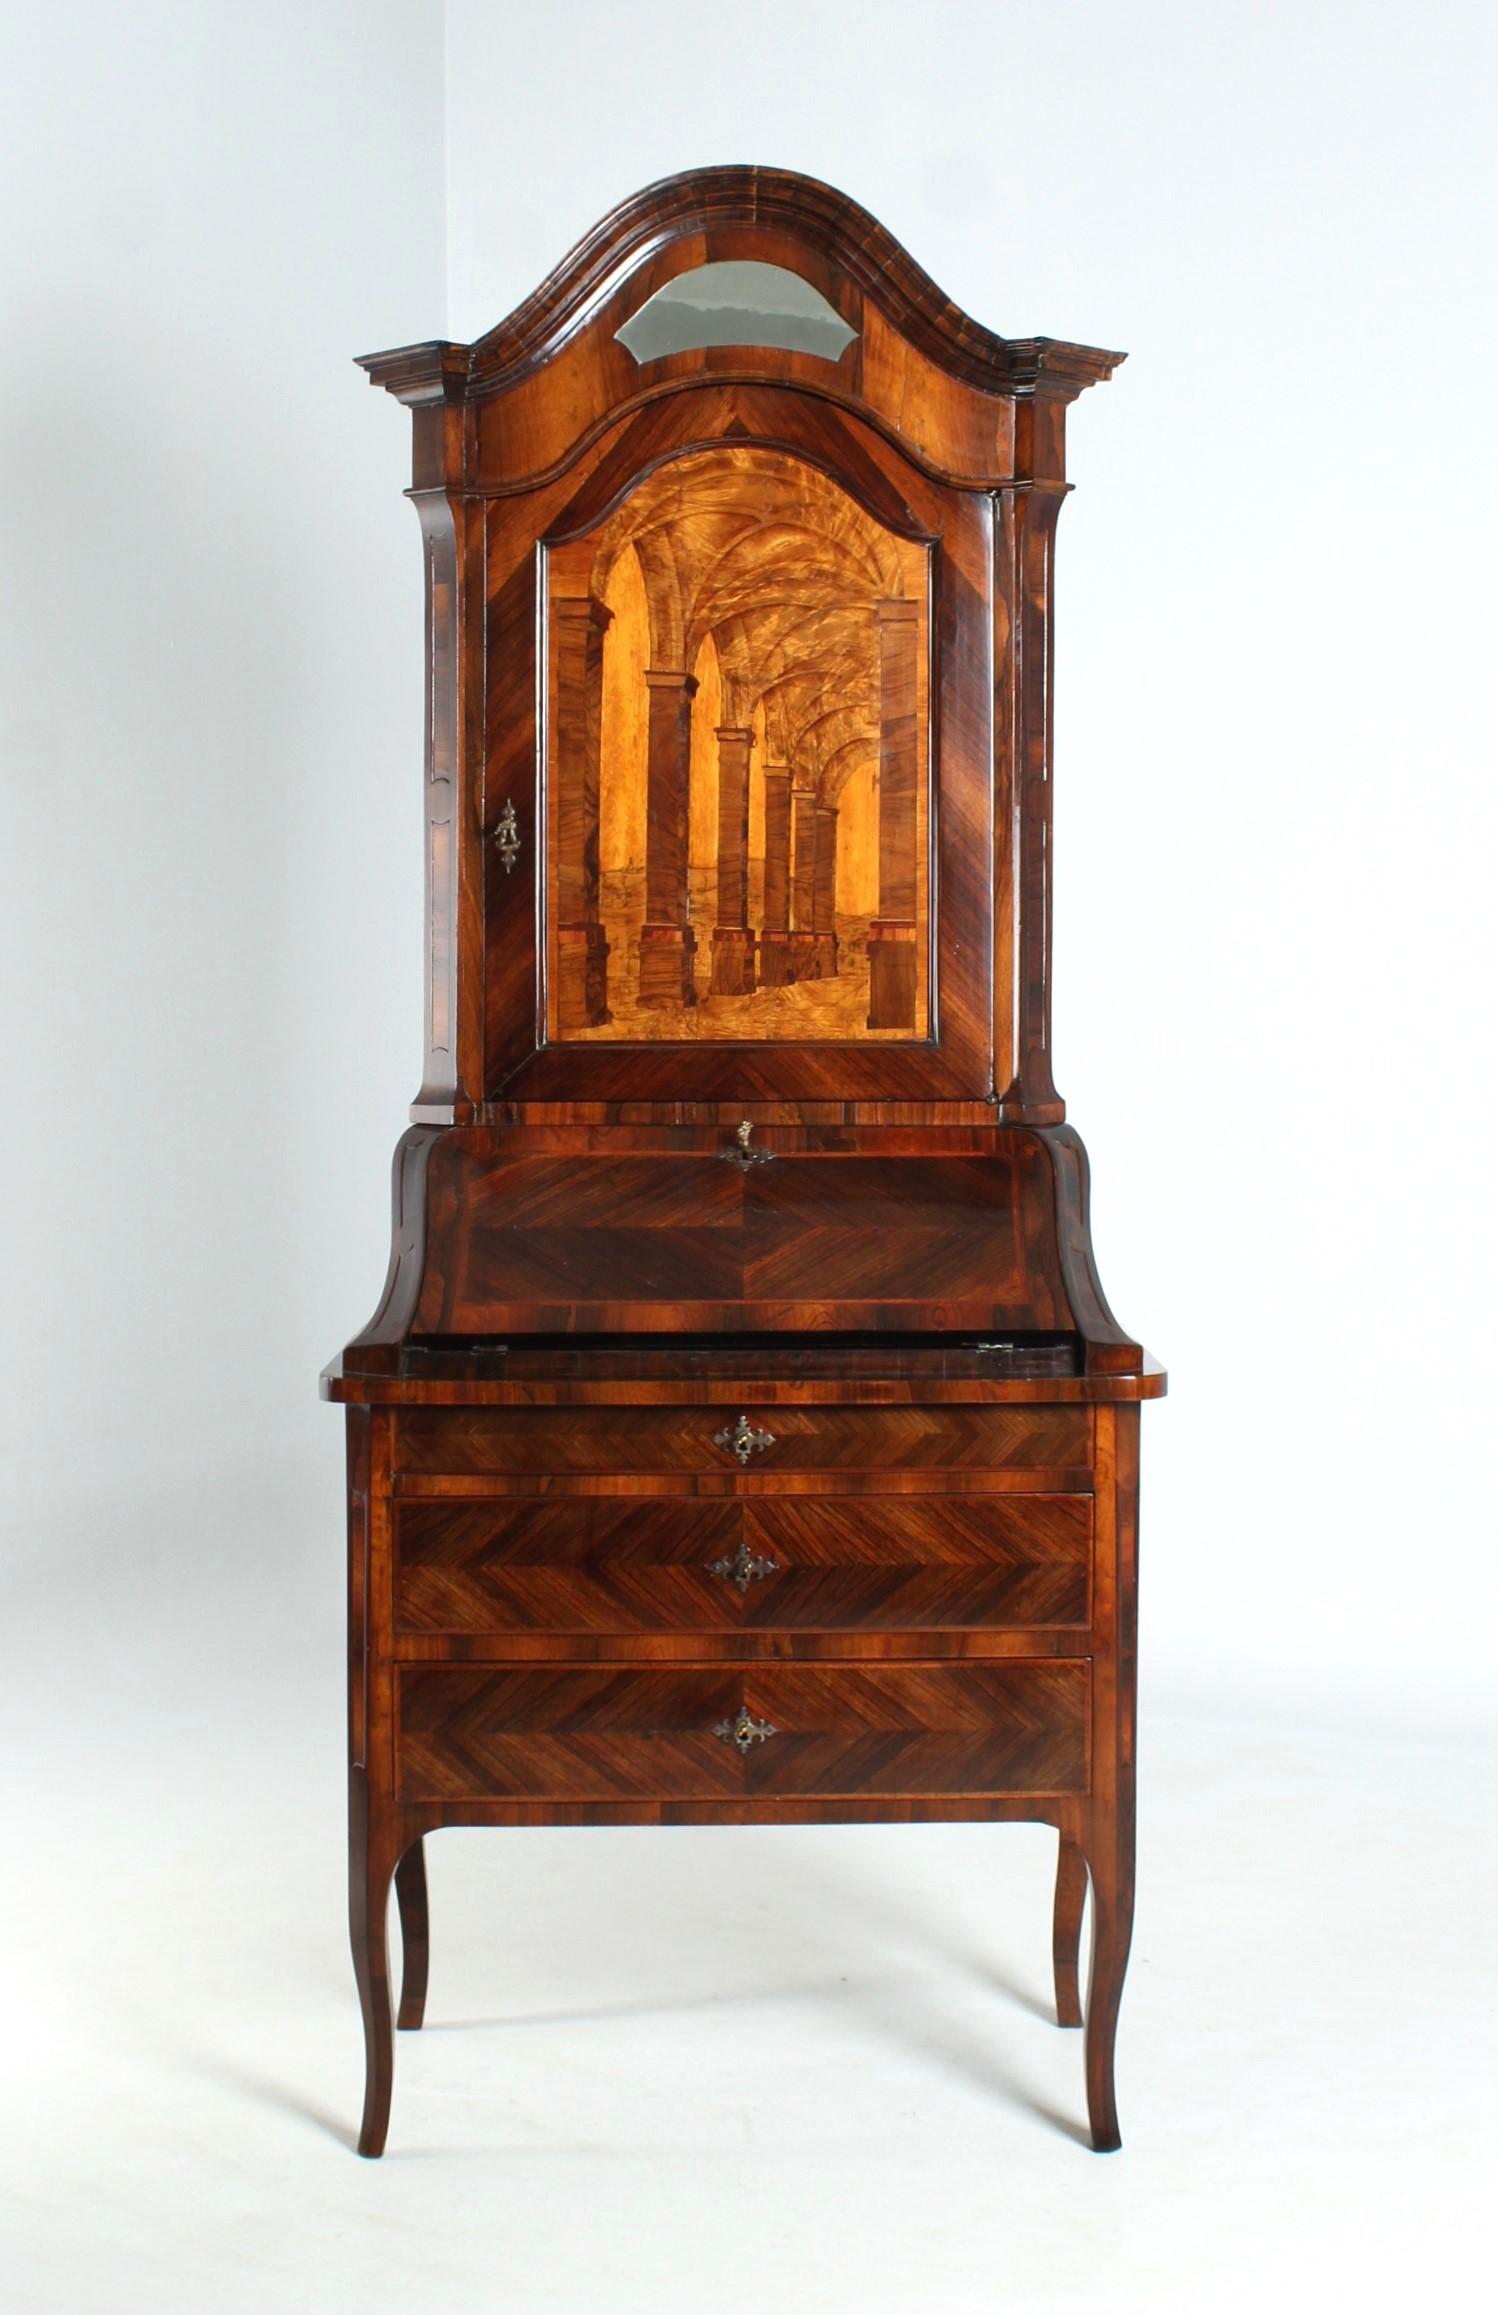 Antique top secretary

Italy
various precious woods
second half 18th century

Dimensions: H x W x D: 219 x 89 x 50 cm

Description:
Slender and well-proportioned secretary with architectural marquetry.

Two-piece piece of furniture standing on